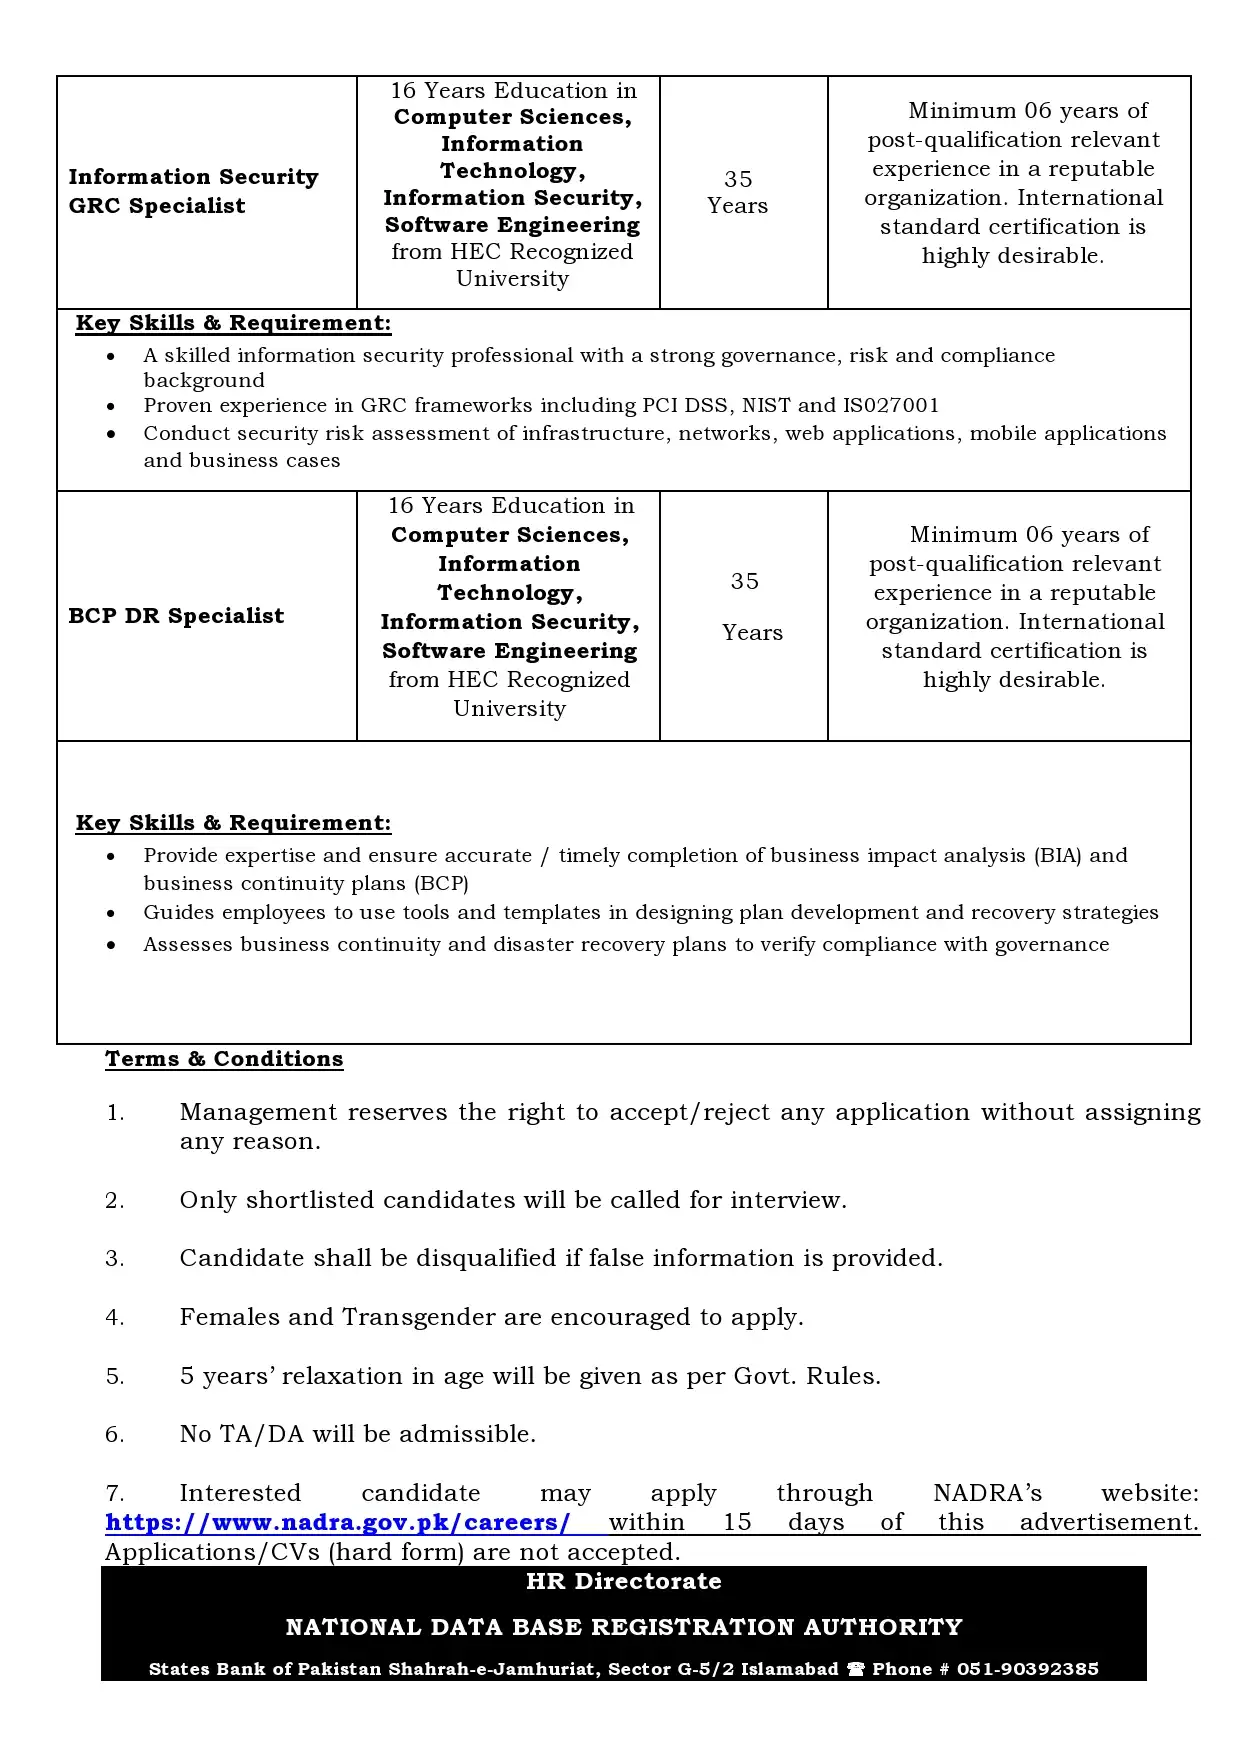 National Database Registration Authority Jobs 2023 - Official Advertisements